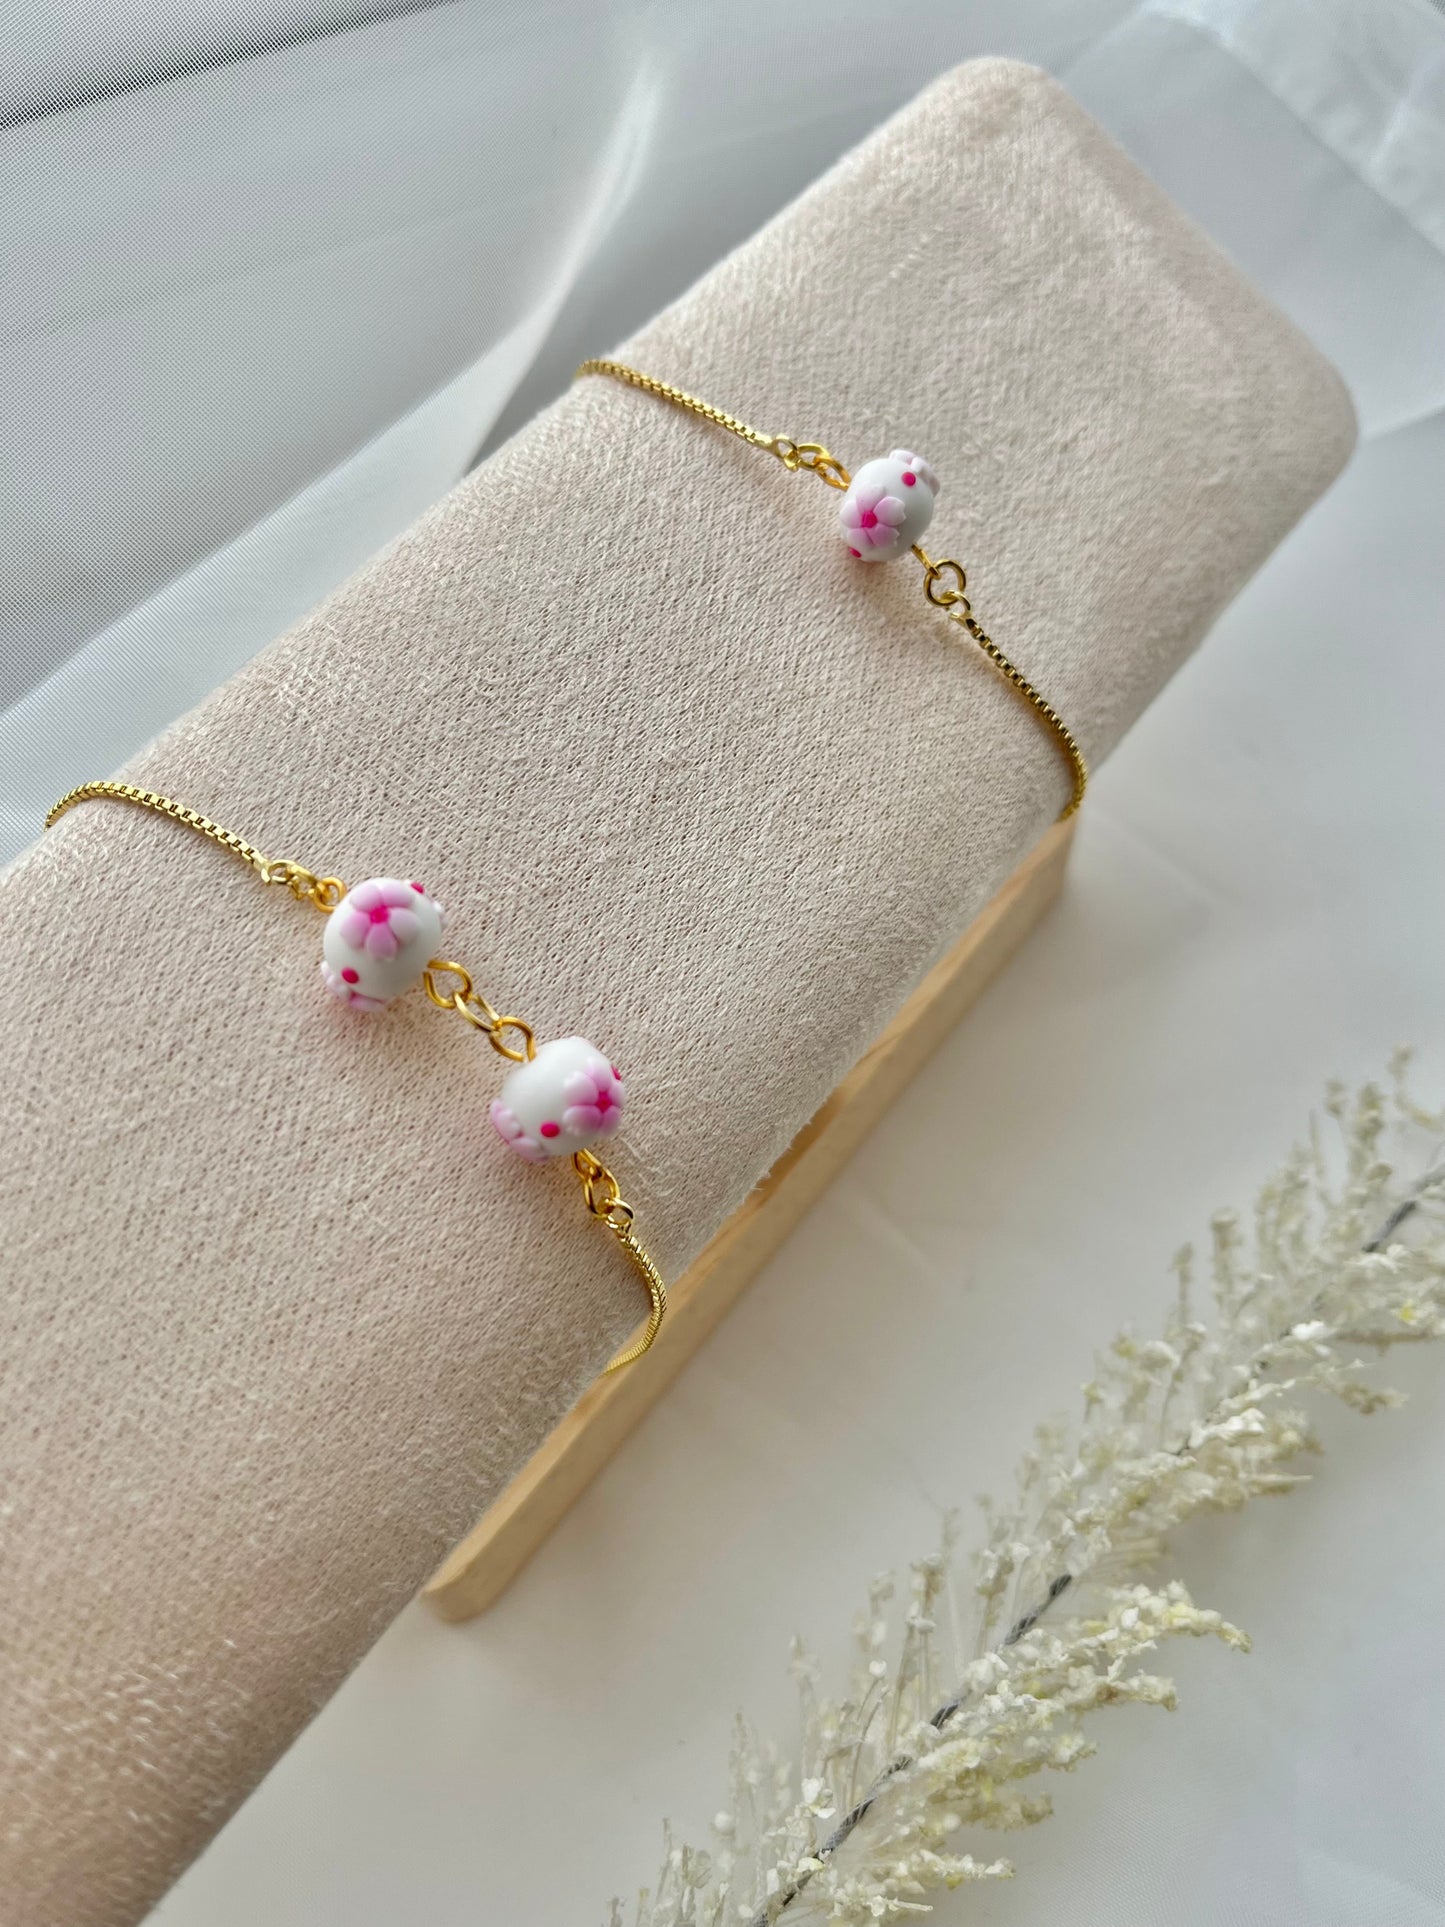 Two floral bracelet in cherry blossom style on a bracelet stand